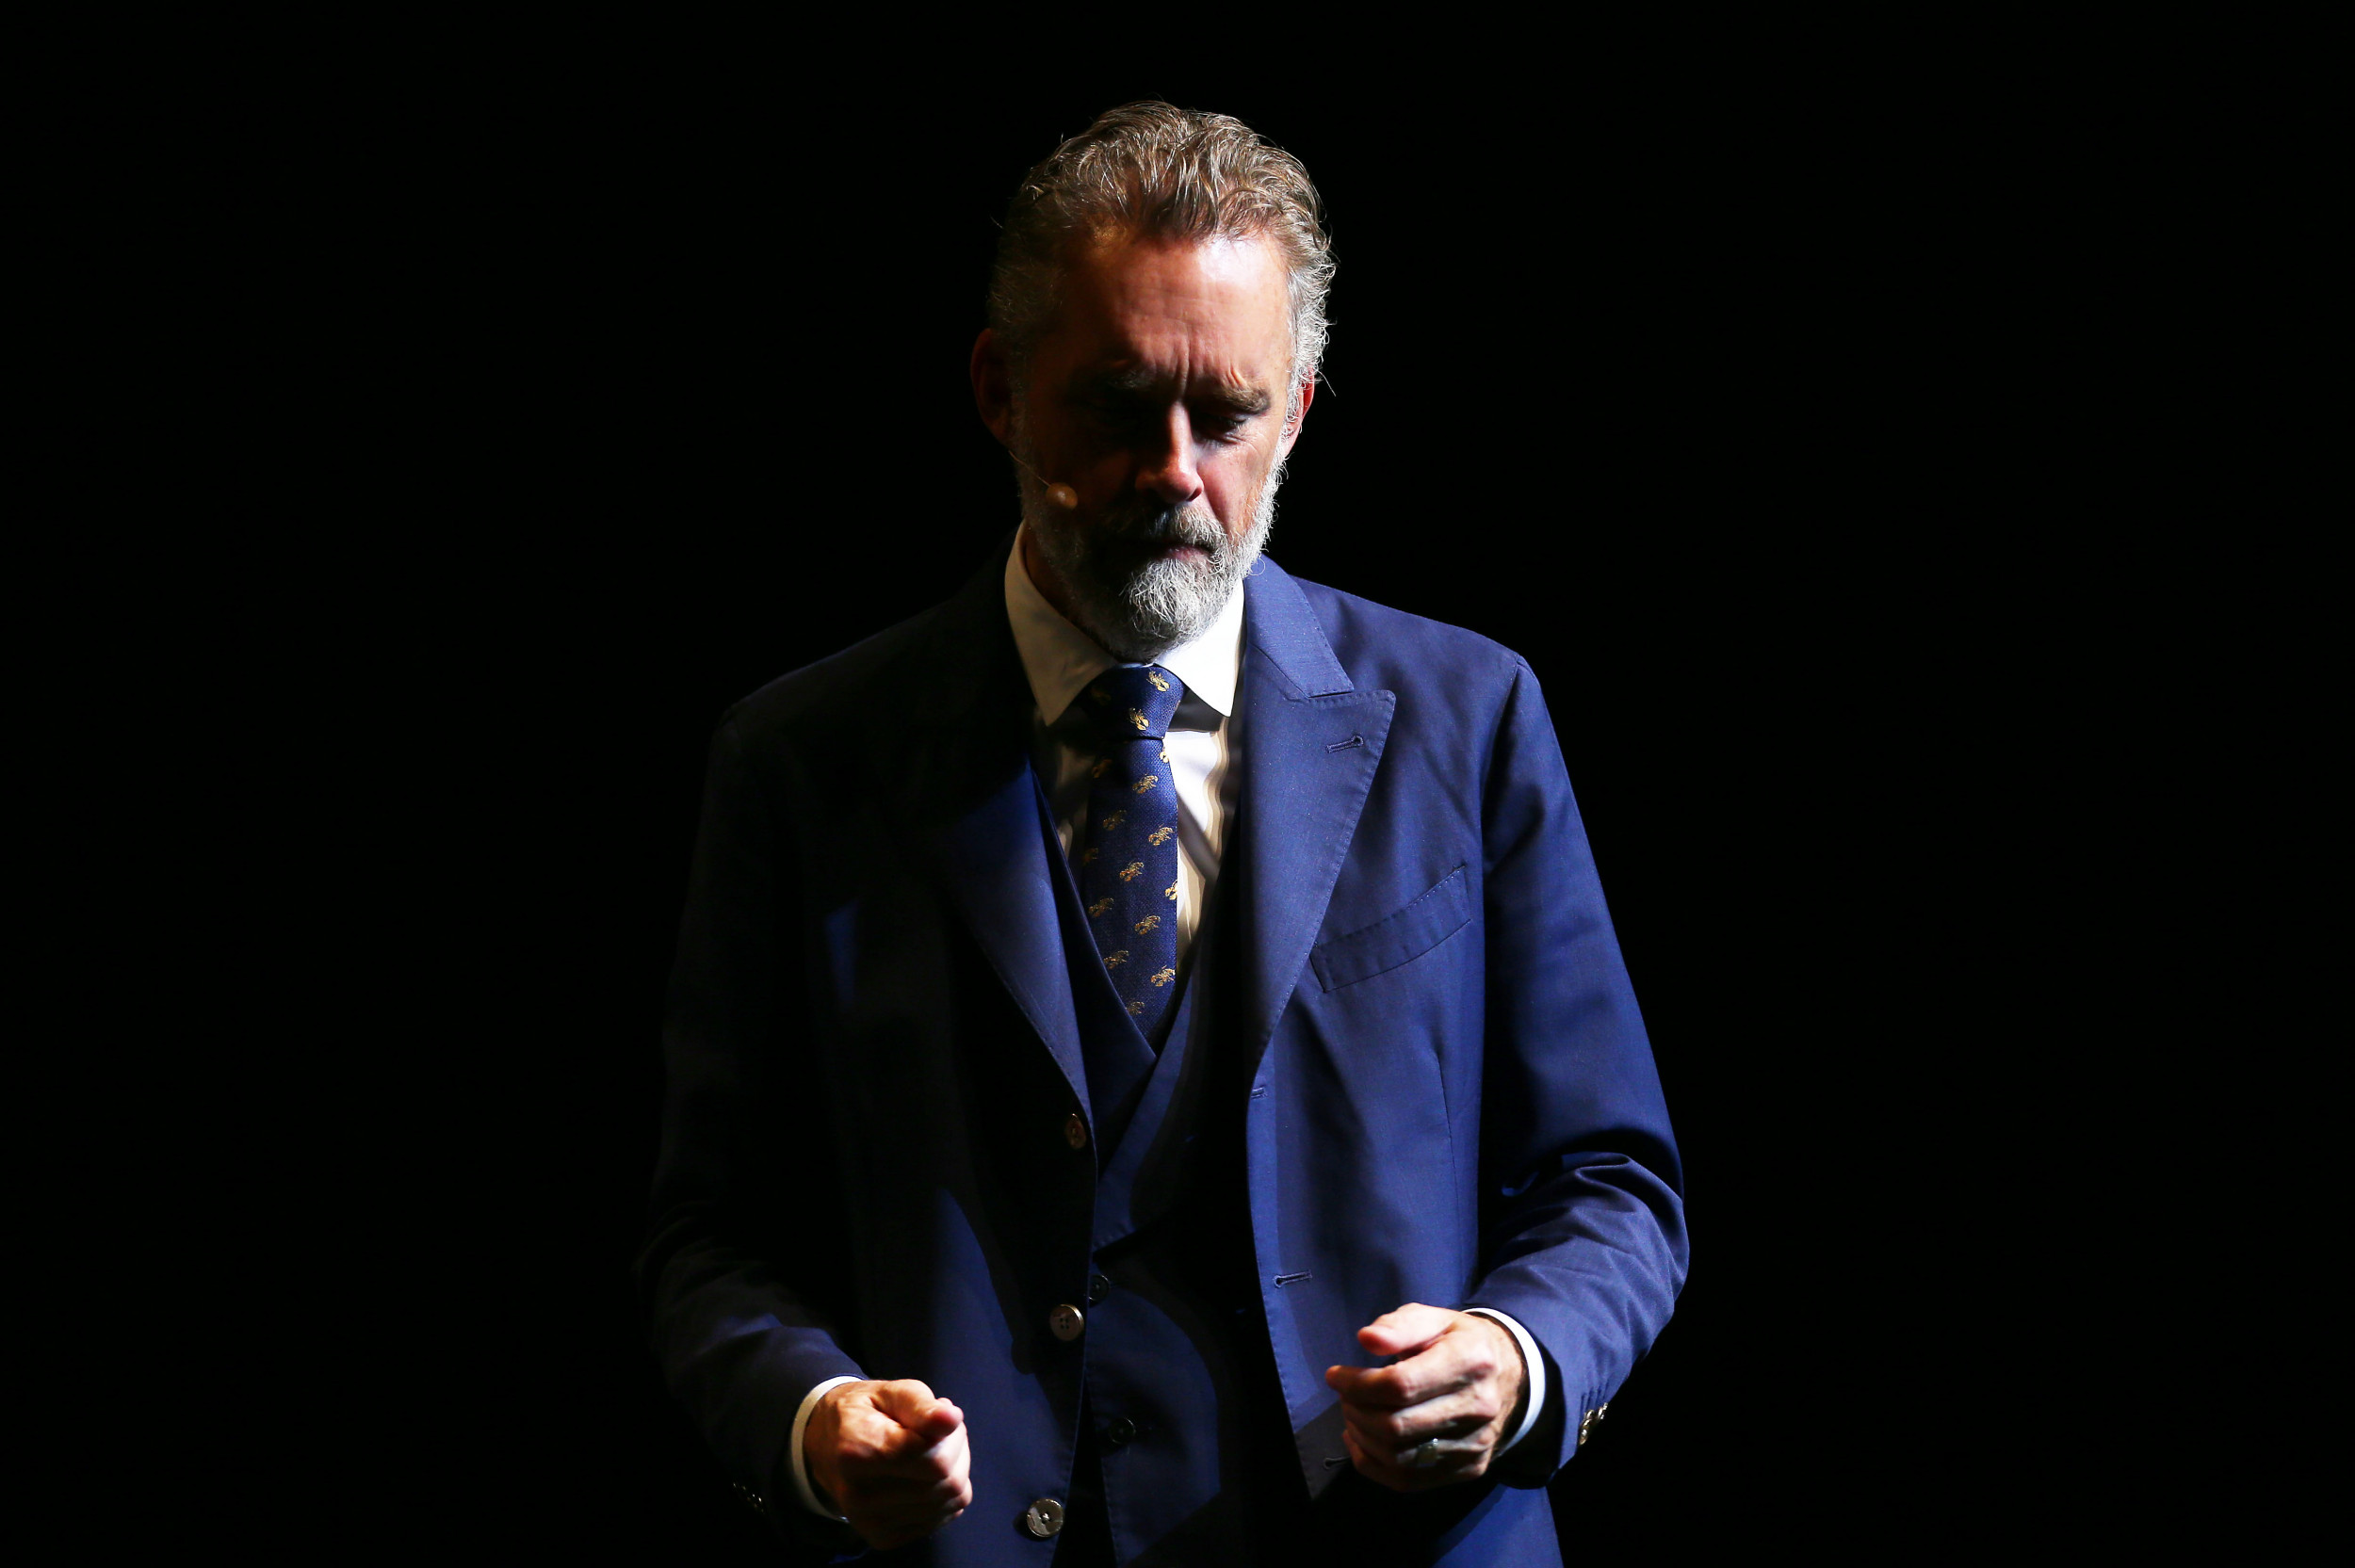 Why Dr. Jordan Peterson matters to young men